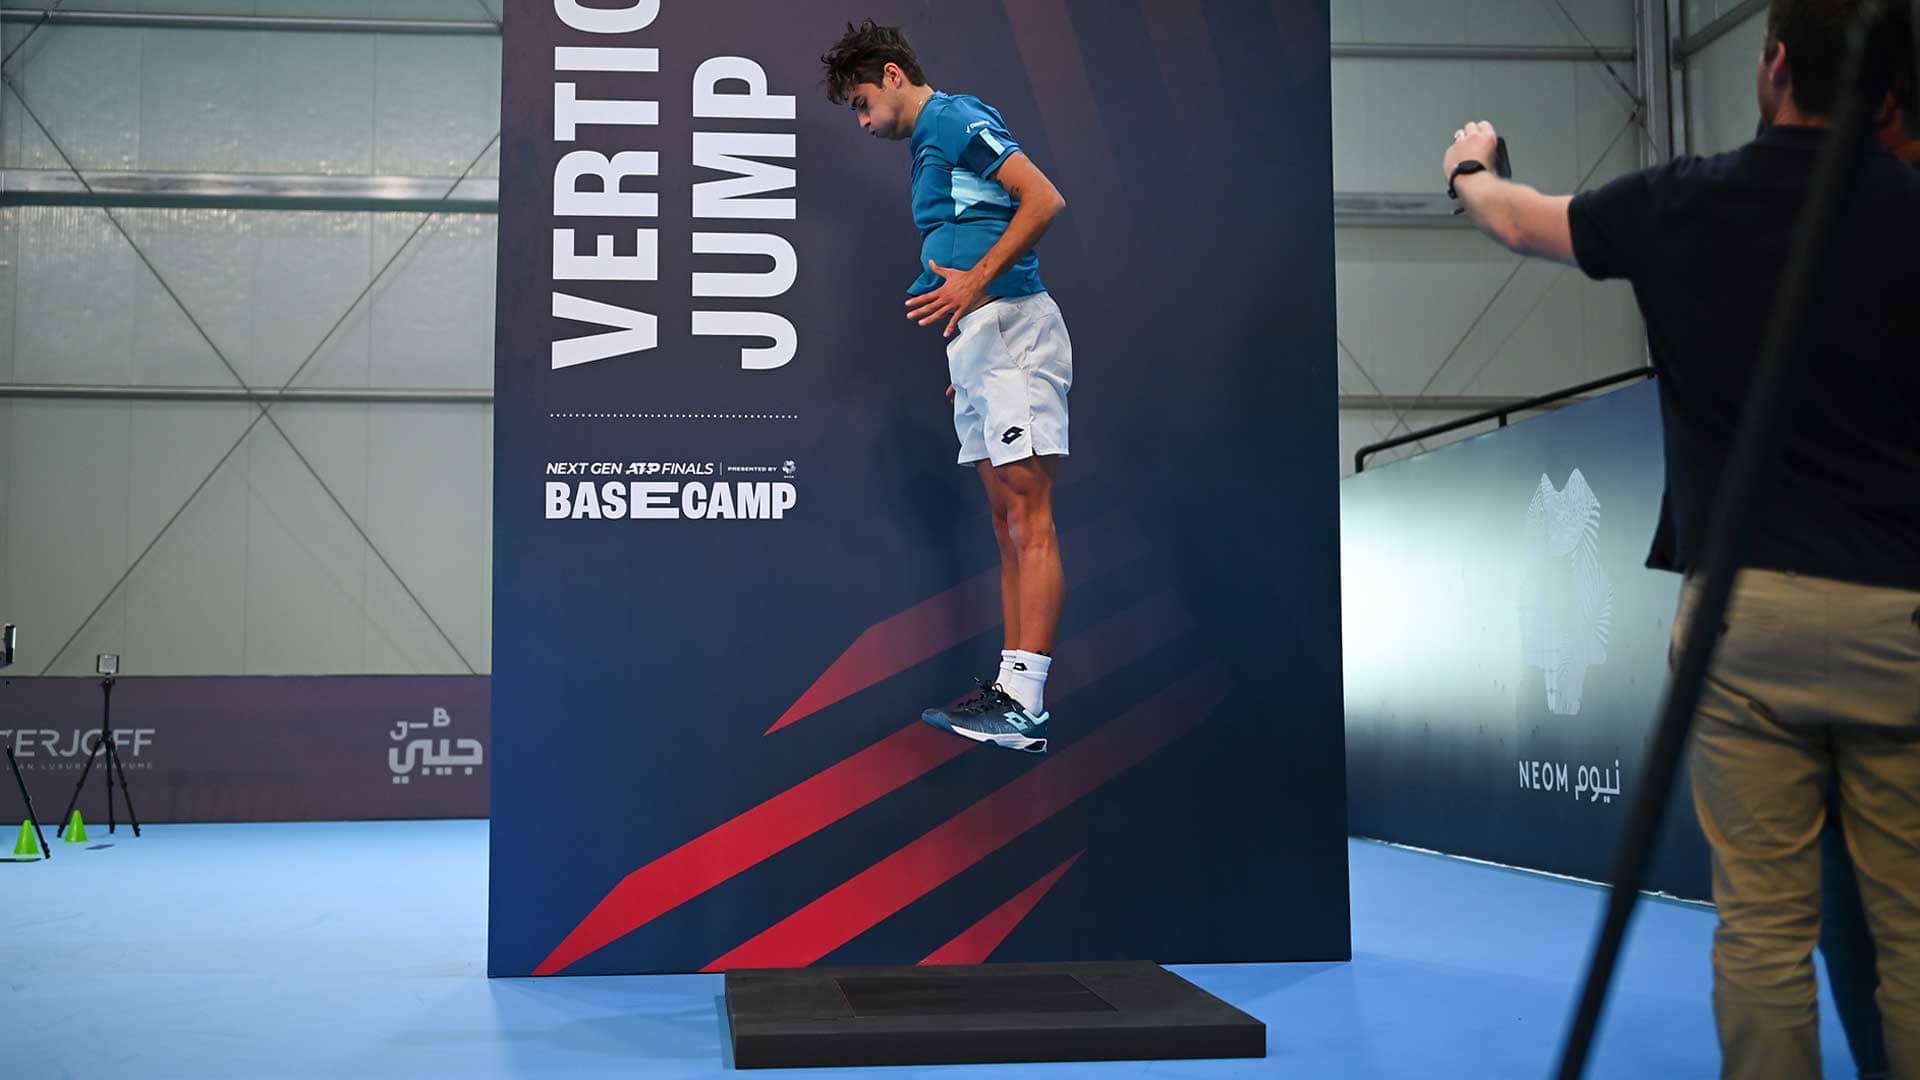 An Introduction To 'Basecamp' At The Next Gen ATP Finals presented by NEOM